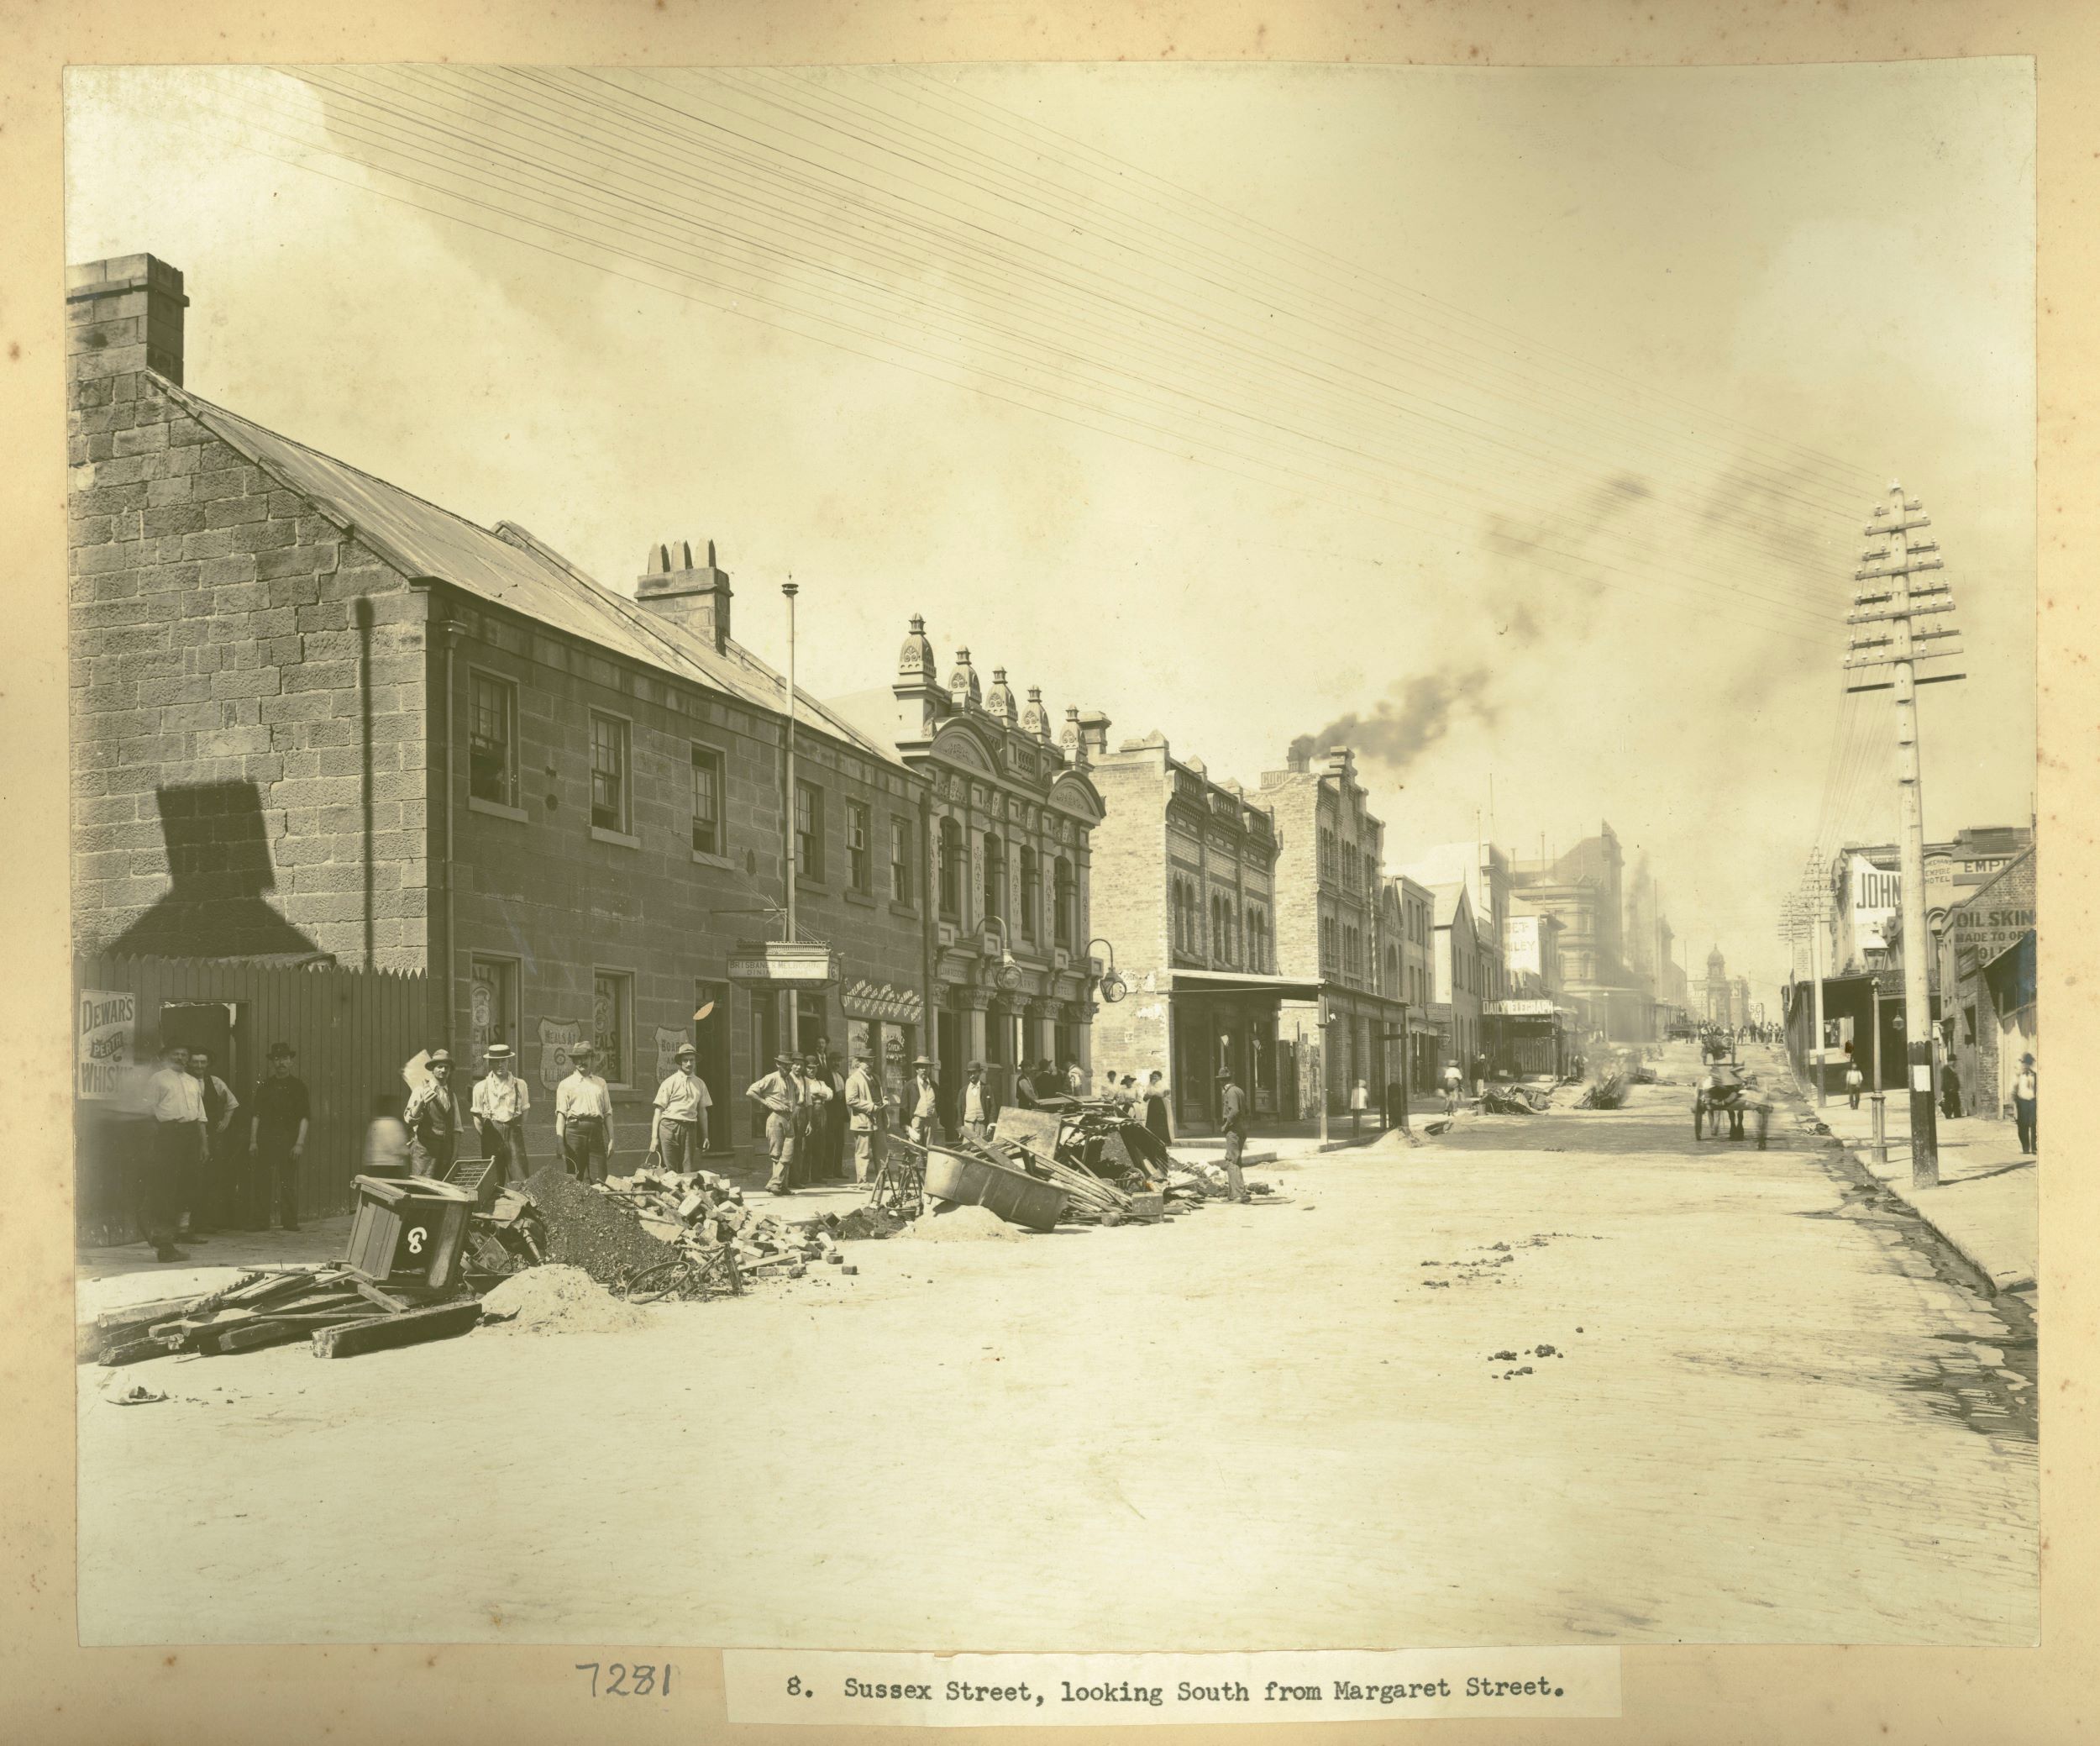 A dirt road with horse and cart and workmen to the side where piles of rubble and rubbish have been dropped.